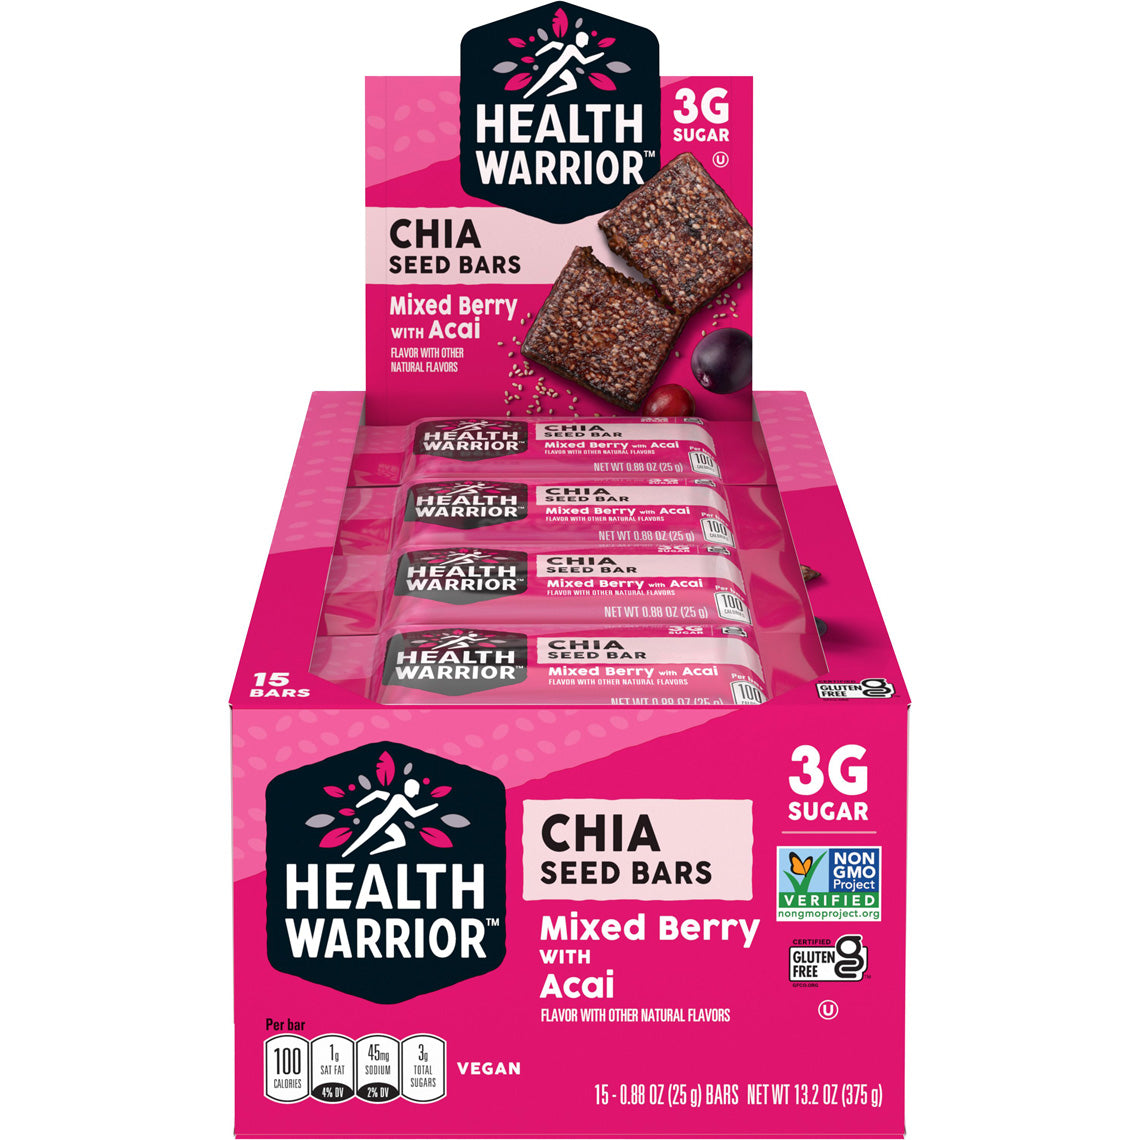 Image of Health Warrior, Mixed Berry with Acai, 15 Bars box